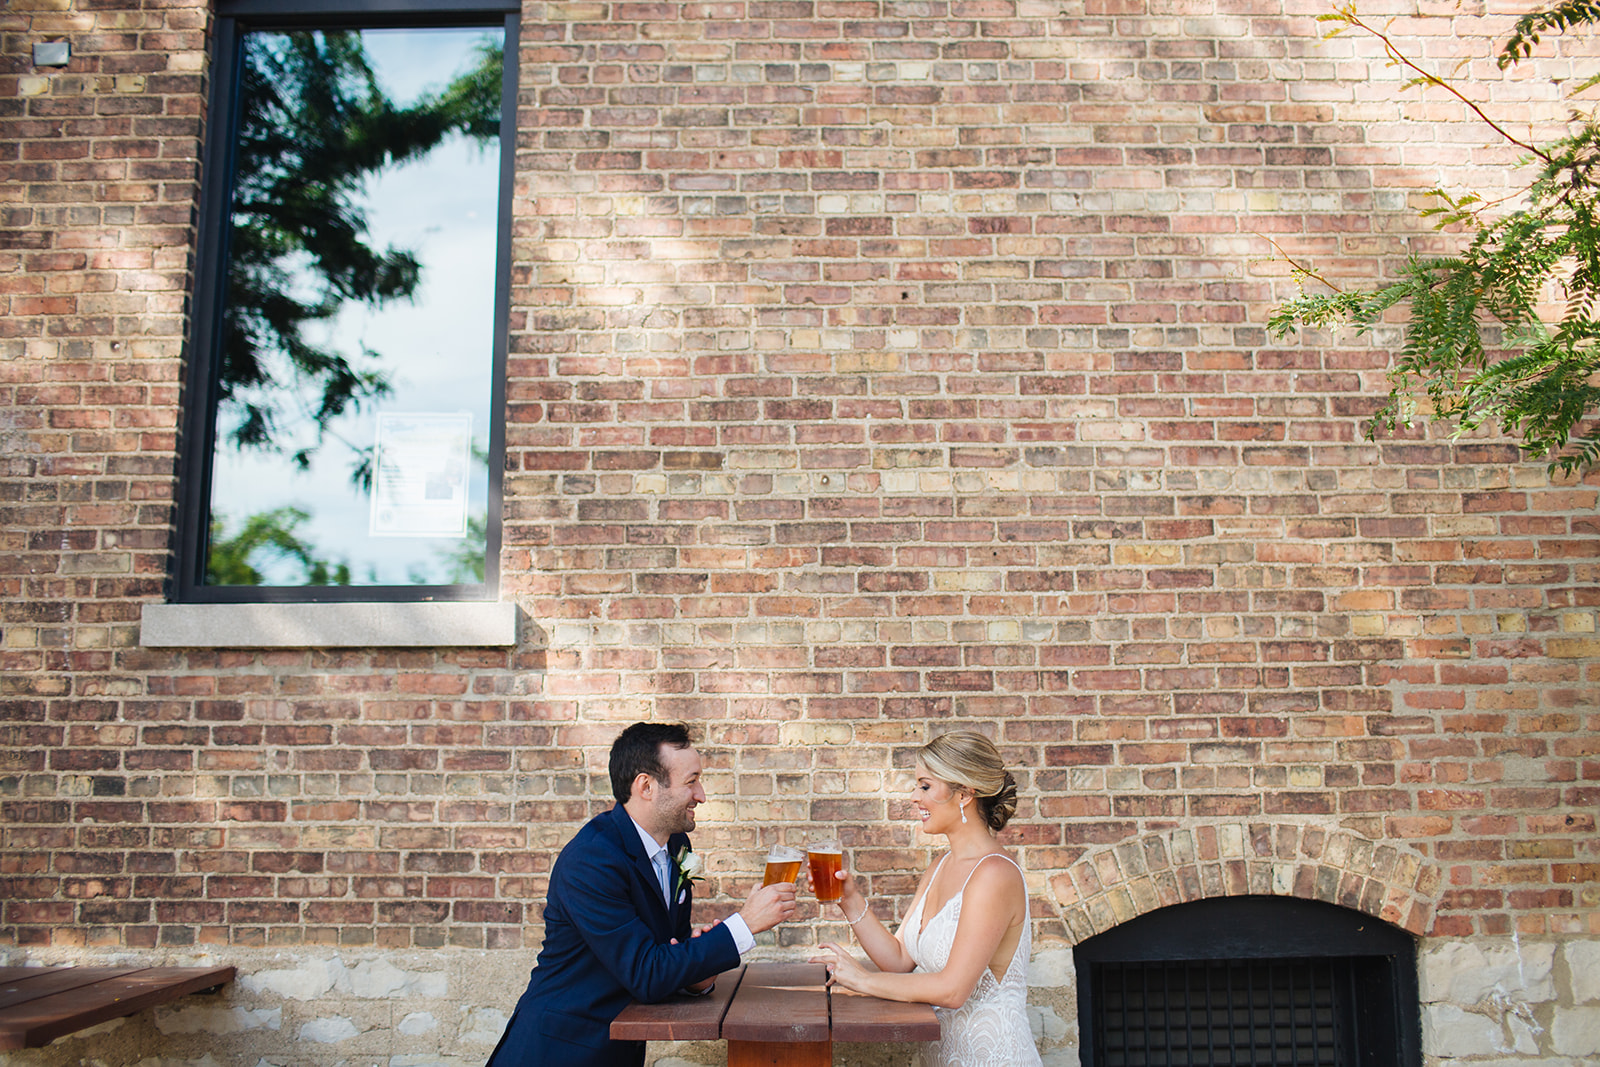 small wedding venues in chicago can be at a bar.